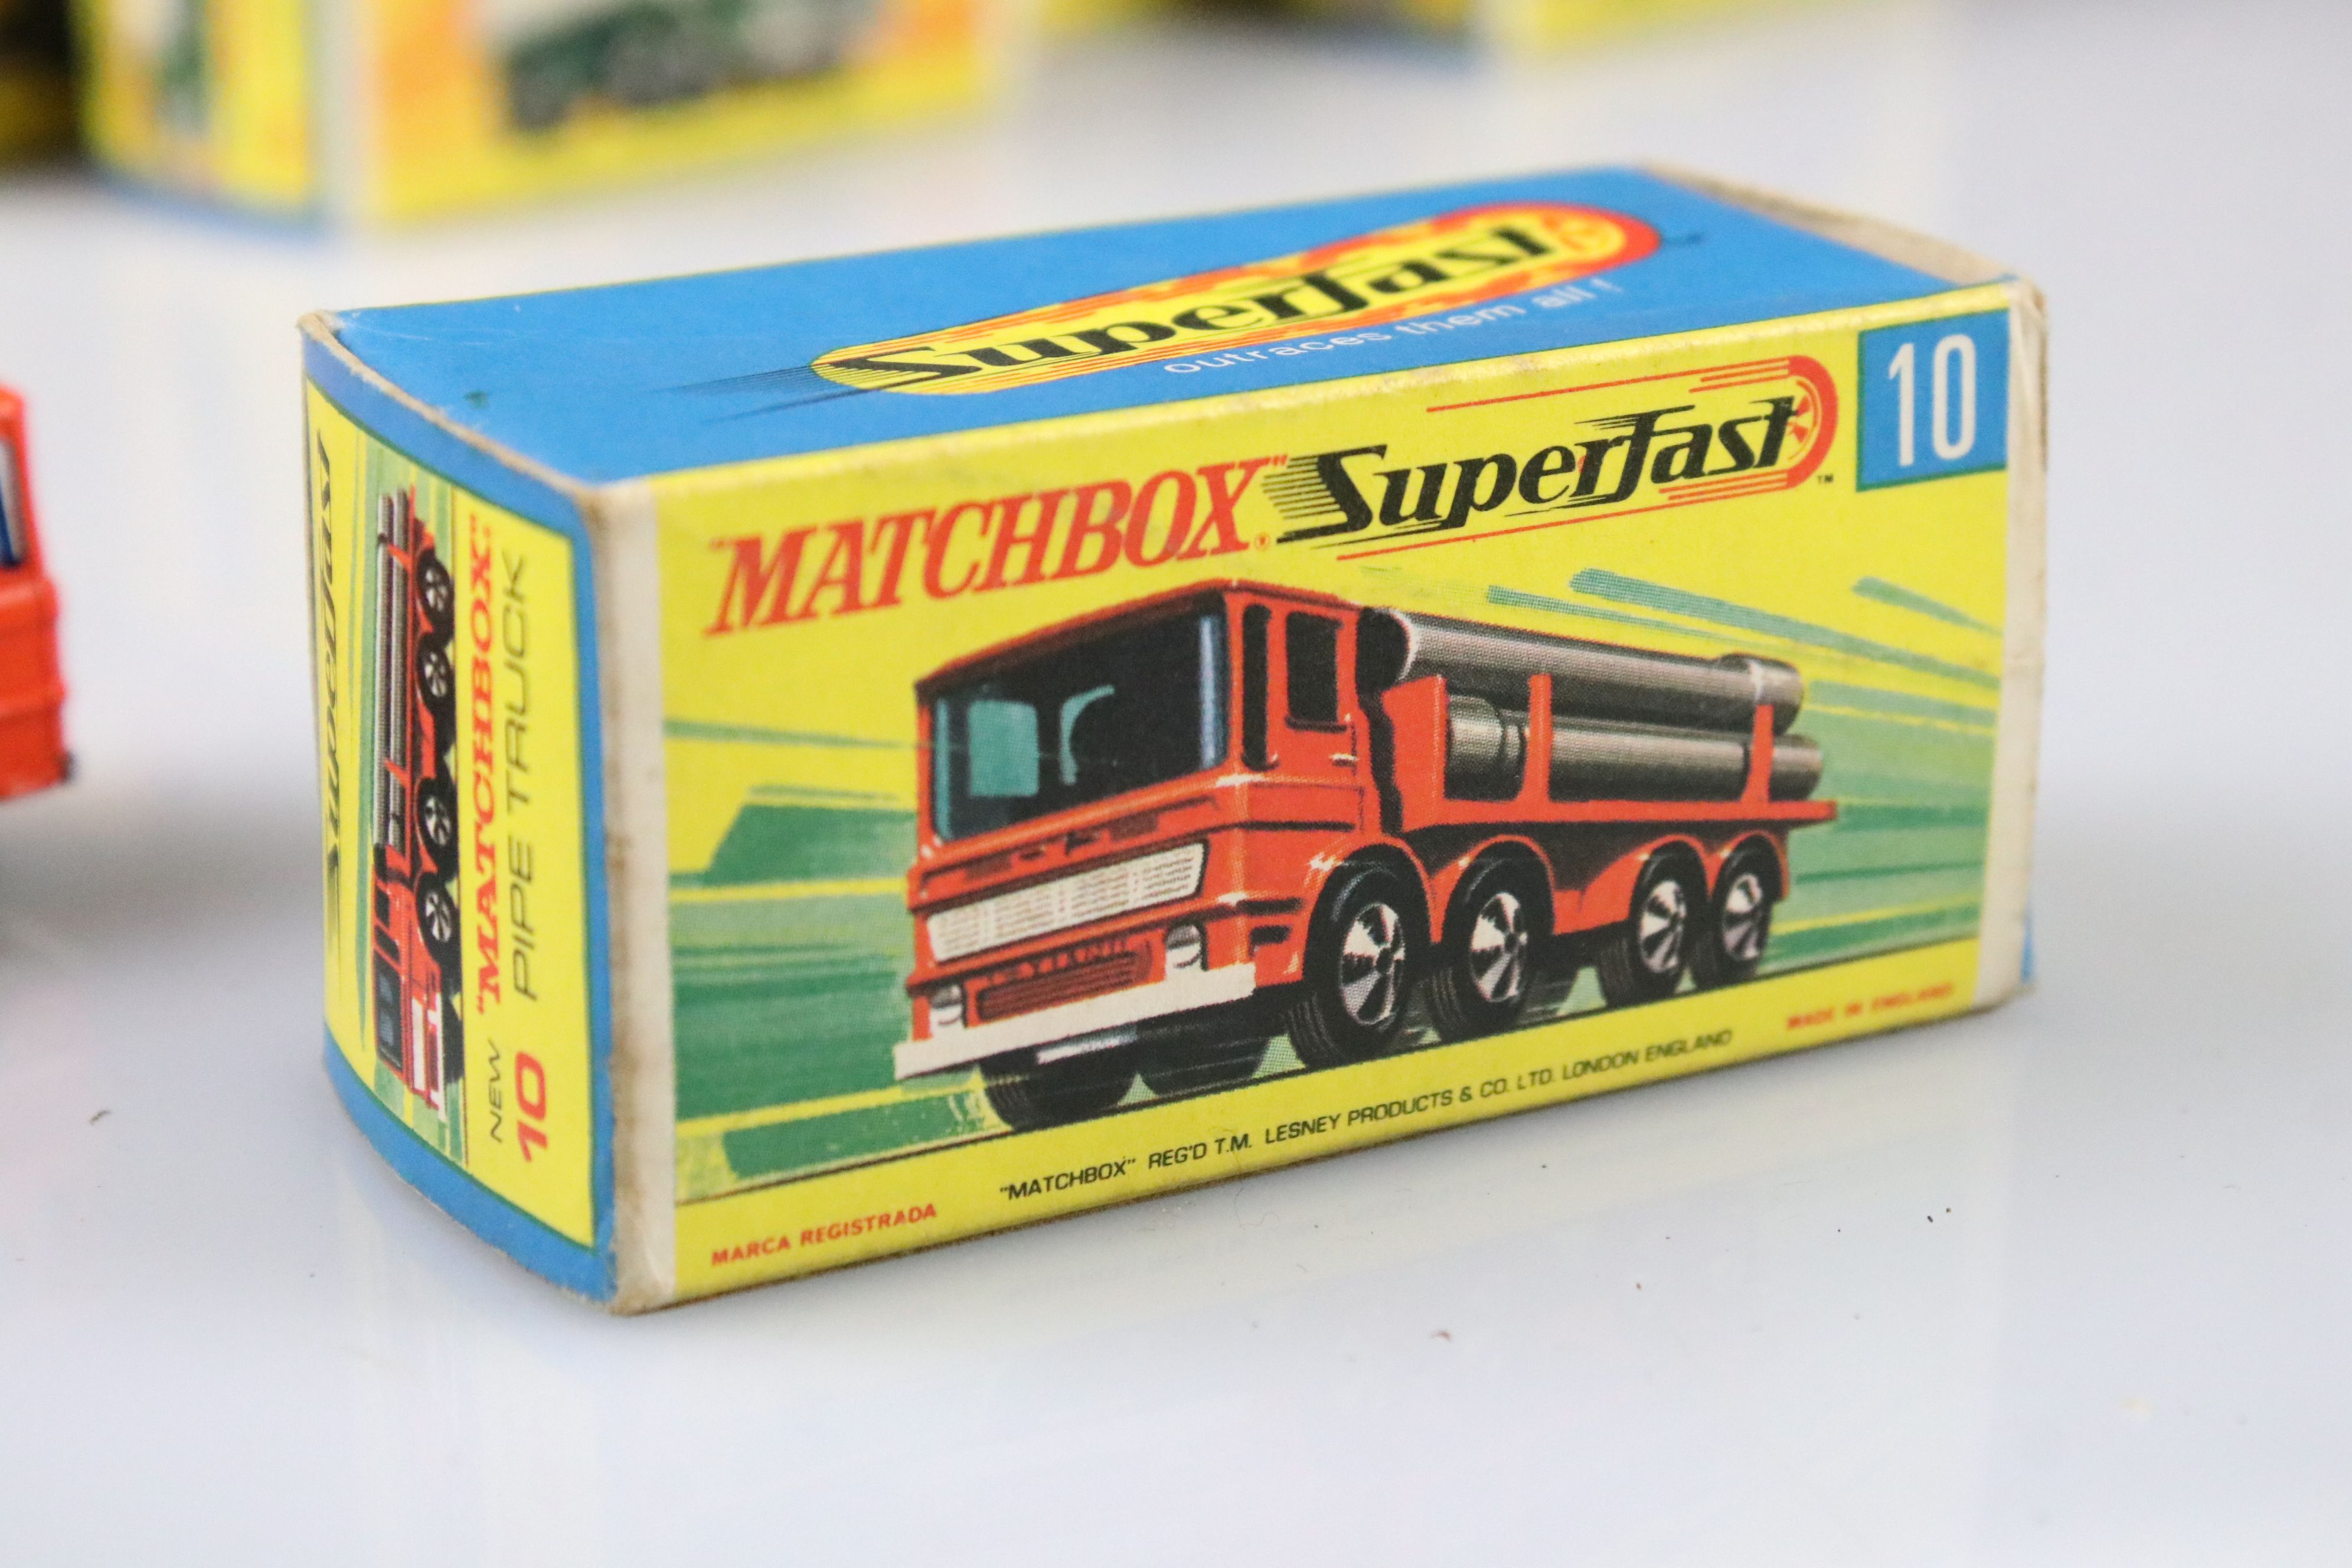 17 Boxed Matchbox Superfast diecast models to include 41 Ford GT, 29 Racing Mini, 57 Landrover - Image 16 of 53